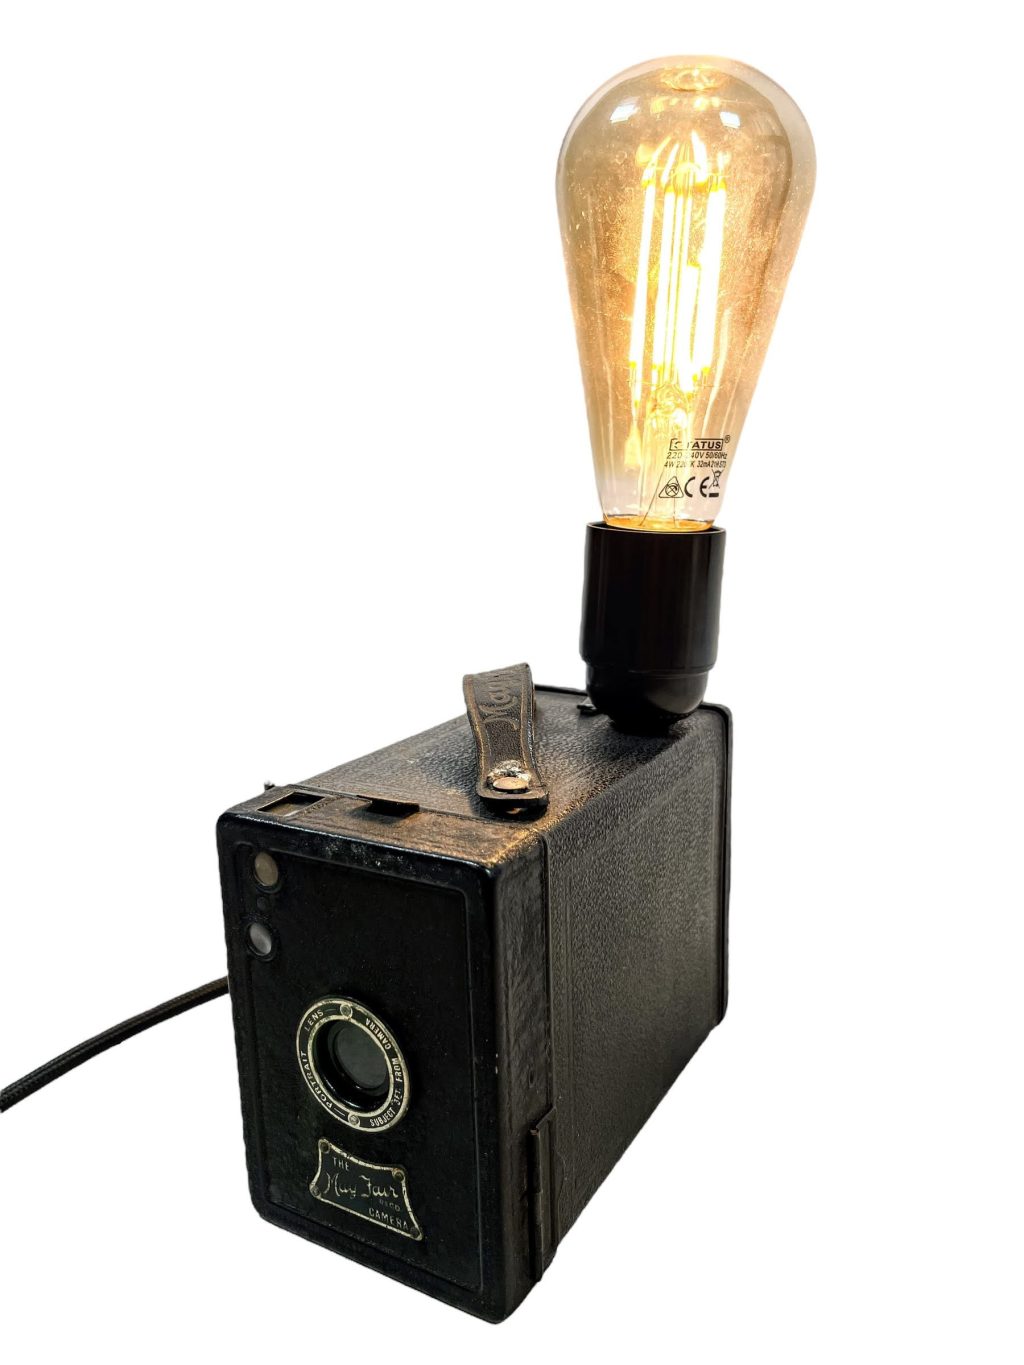 Antique English Mayfair Upcycled Camera With Light Attachment Bulb Holder Desktop Bedside Lamp circa 1920’s